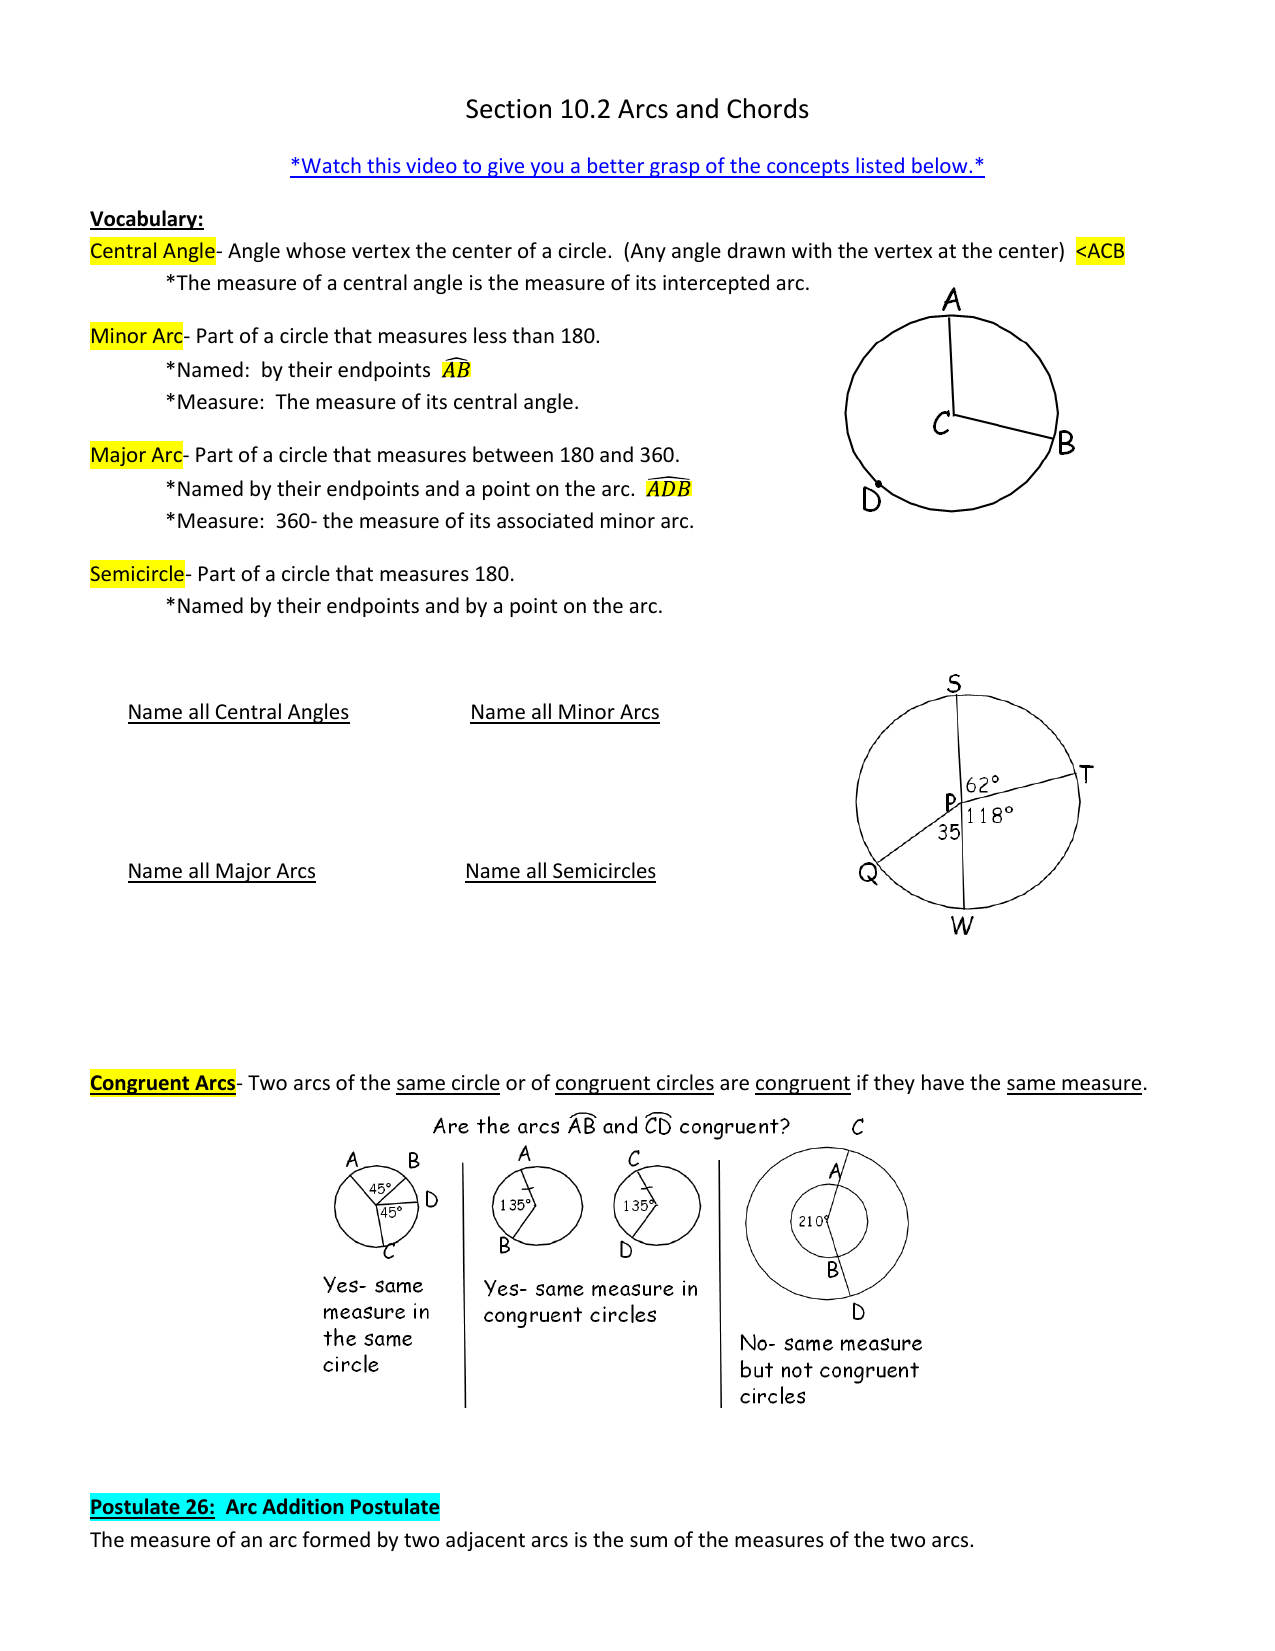 arcs-central-angles-and-chords-worksheet-answers-angleworksheets